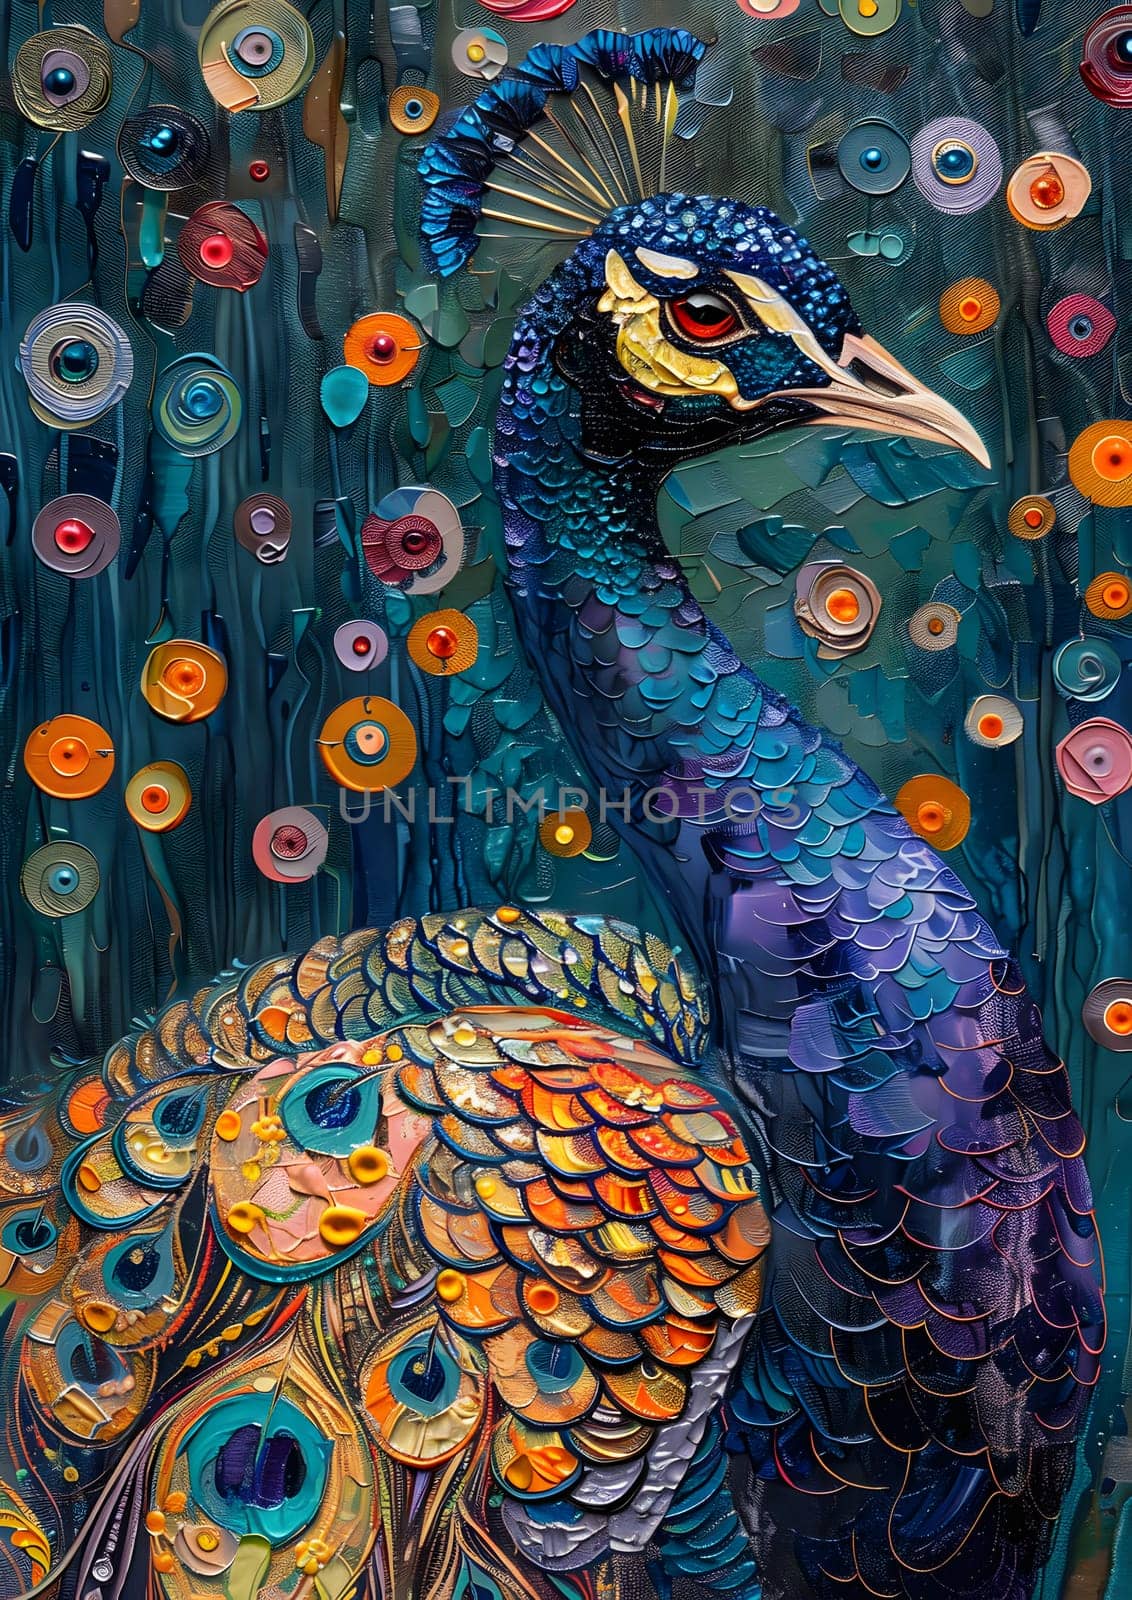 A peacock painting with floral backdrop, showcasing creative artistry by Nadtochiy